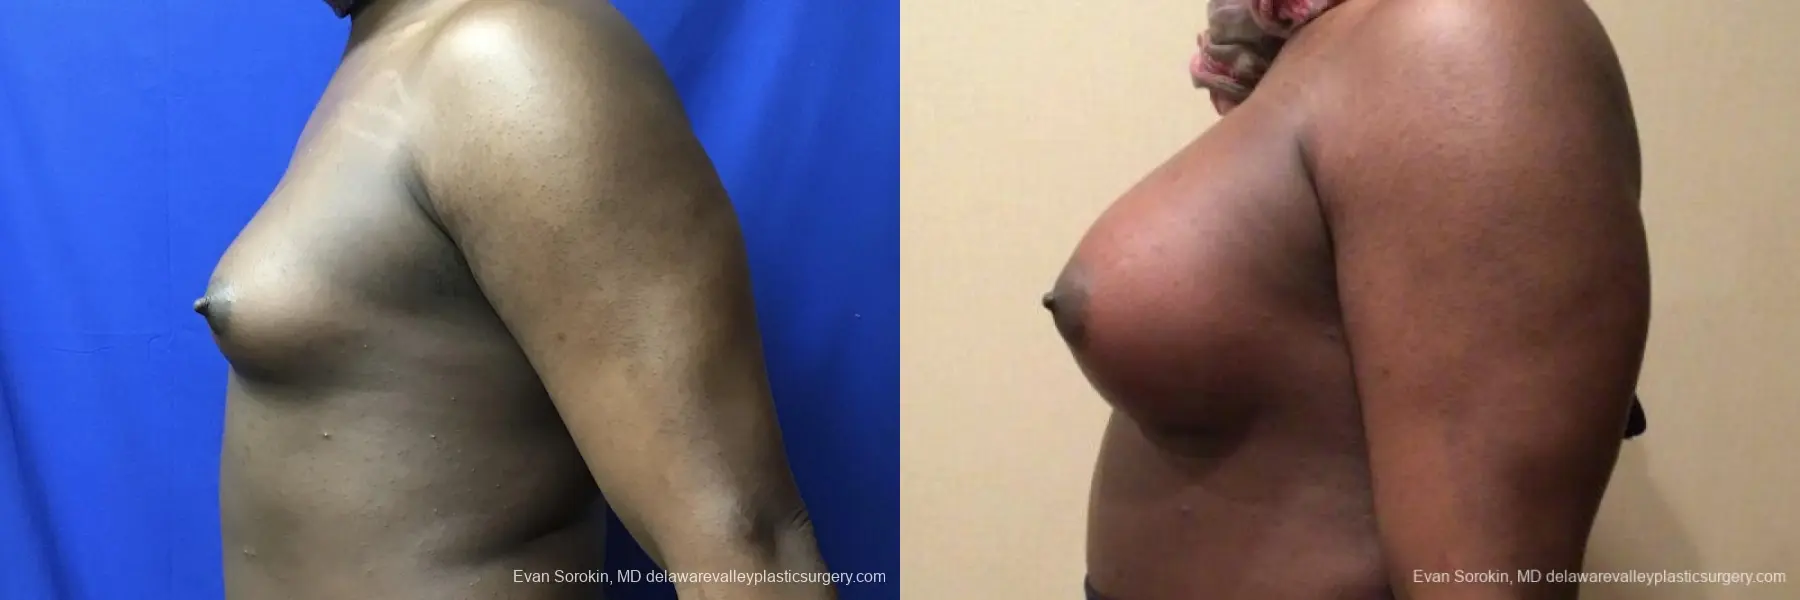 Top Surgery - Male To Female: Patient 2 - Before and After 3